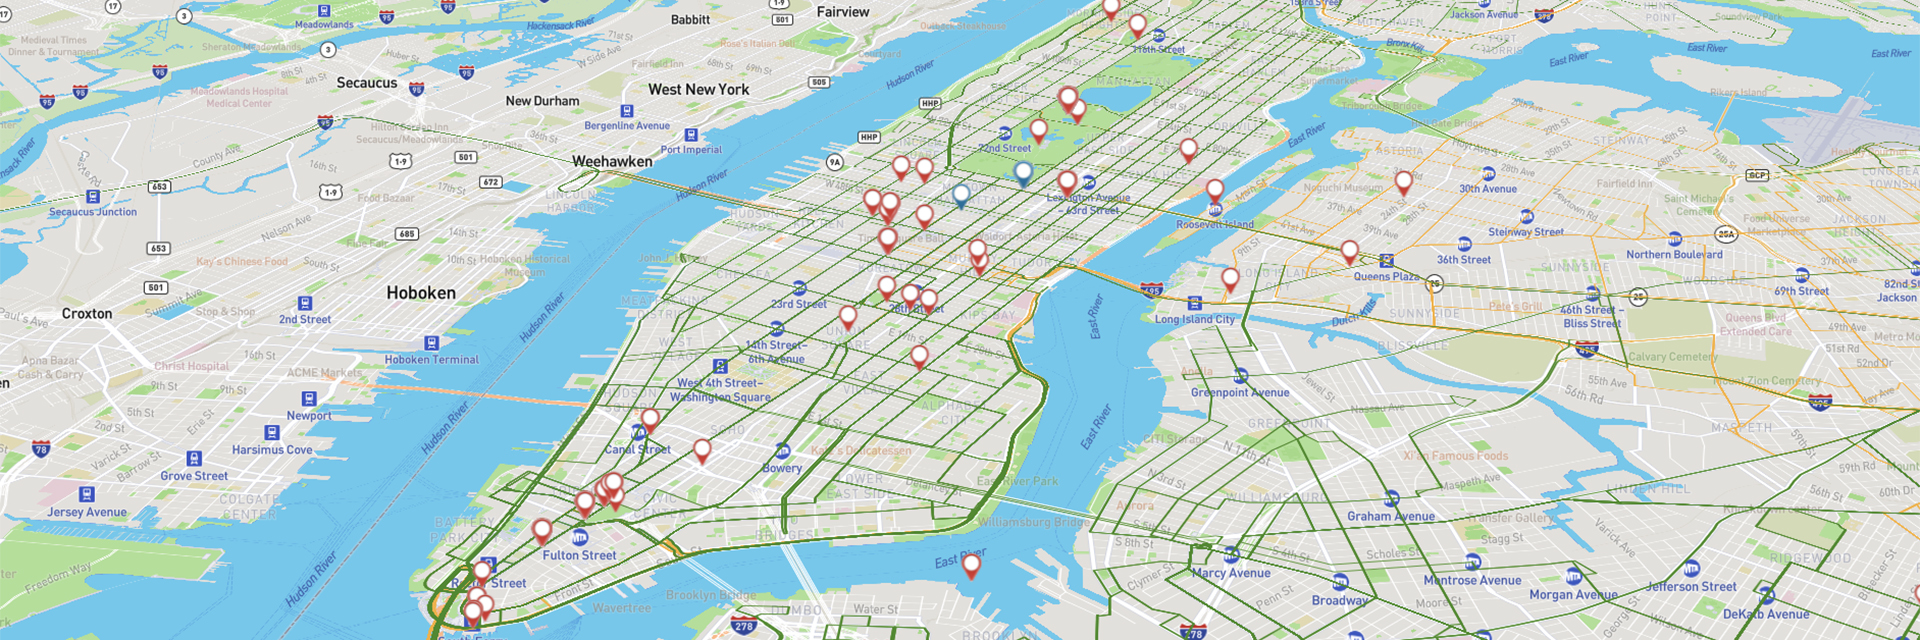 A screen shot of an interactive map and tool for measuring transit.